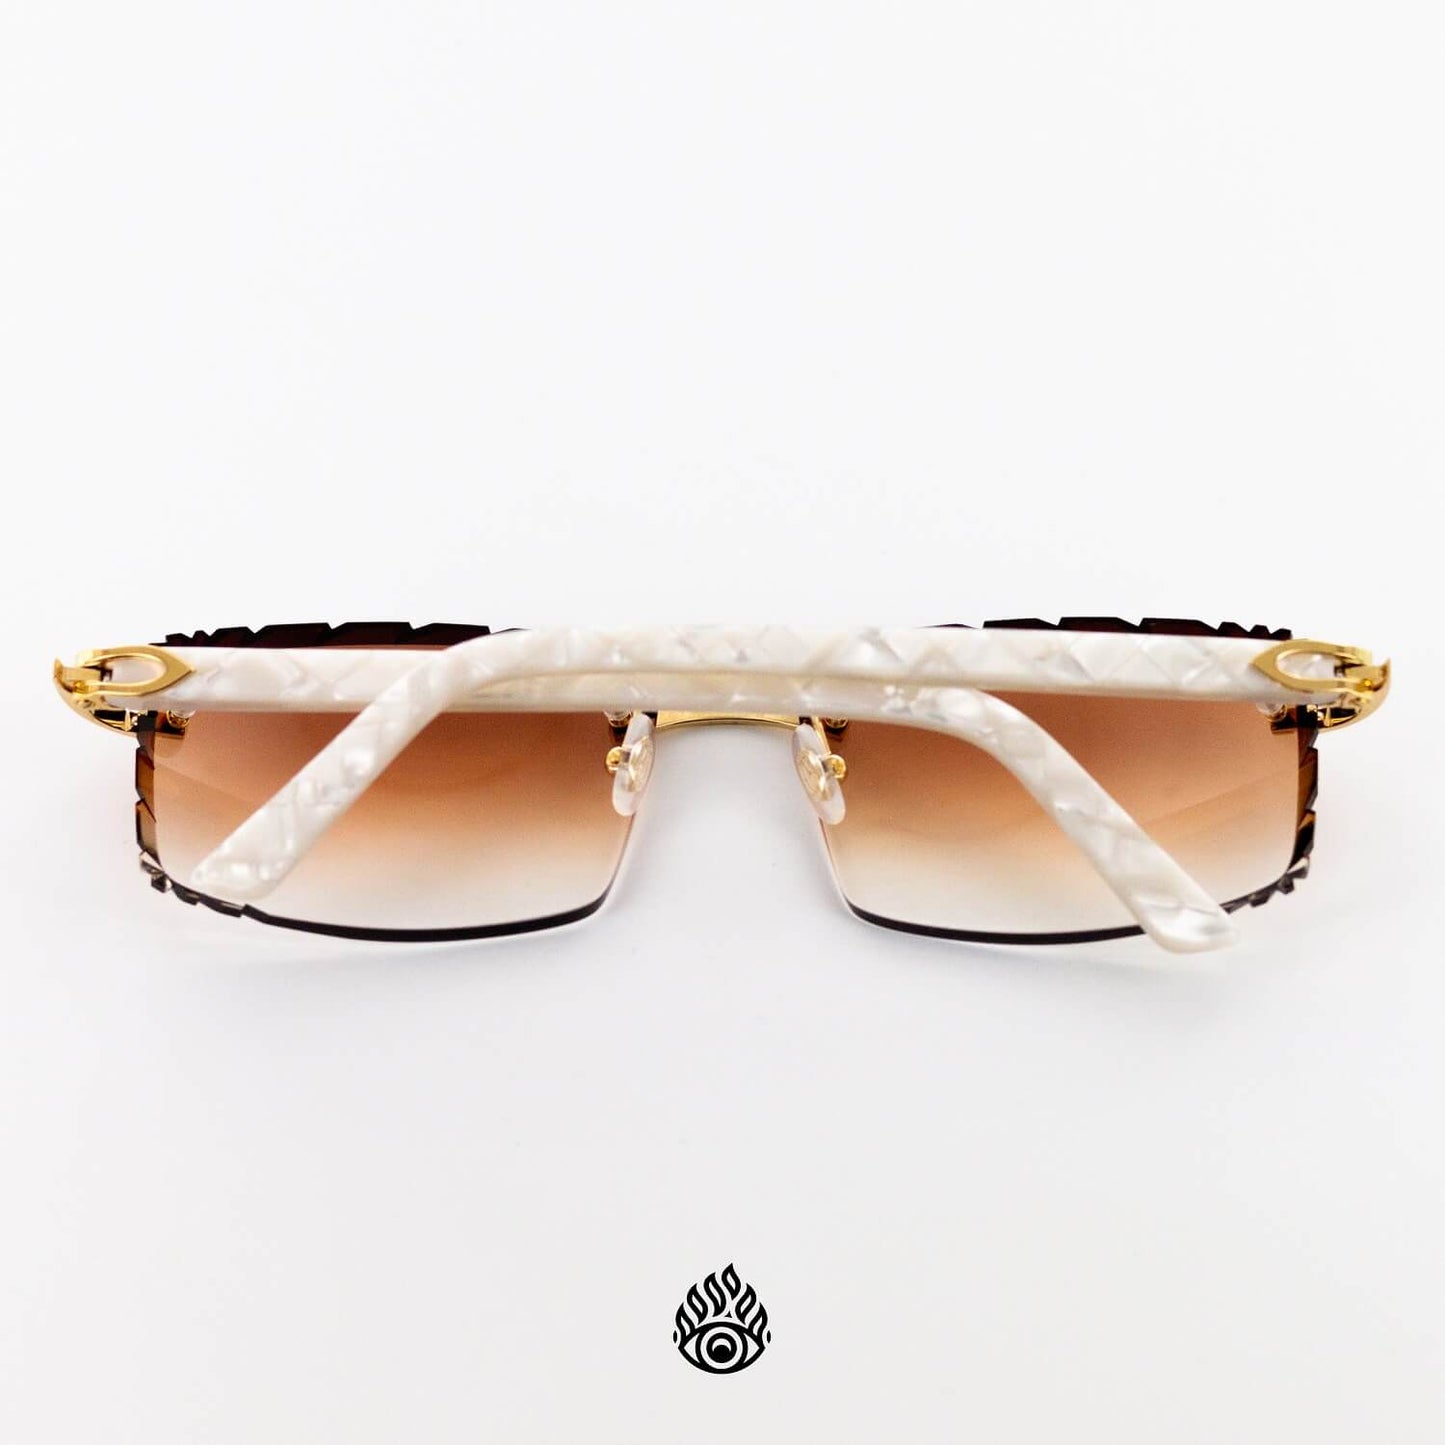 Cartier White Acetate Glasses with Gold C Decor & Honey Brown Lens